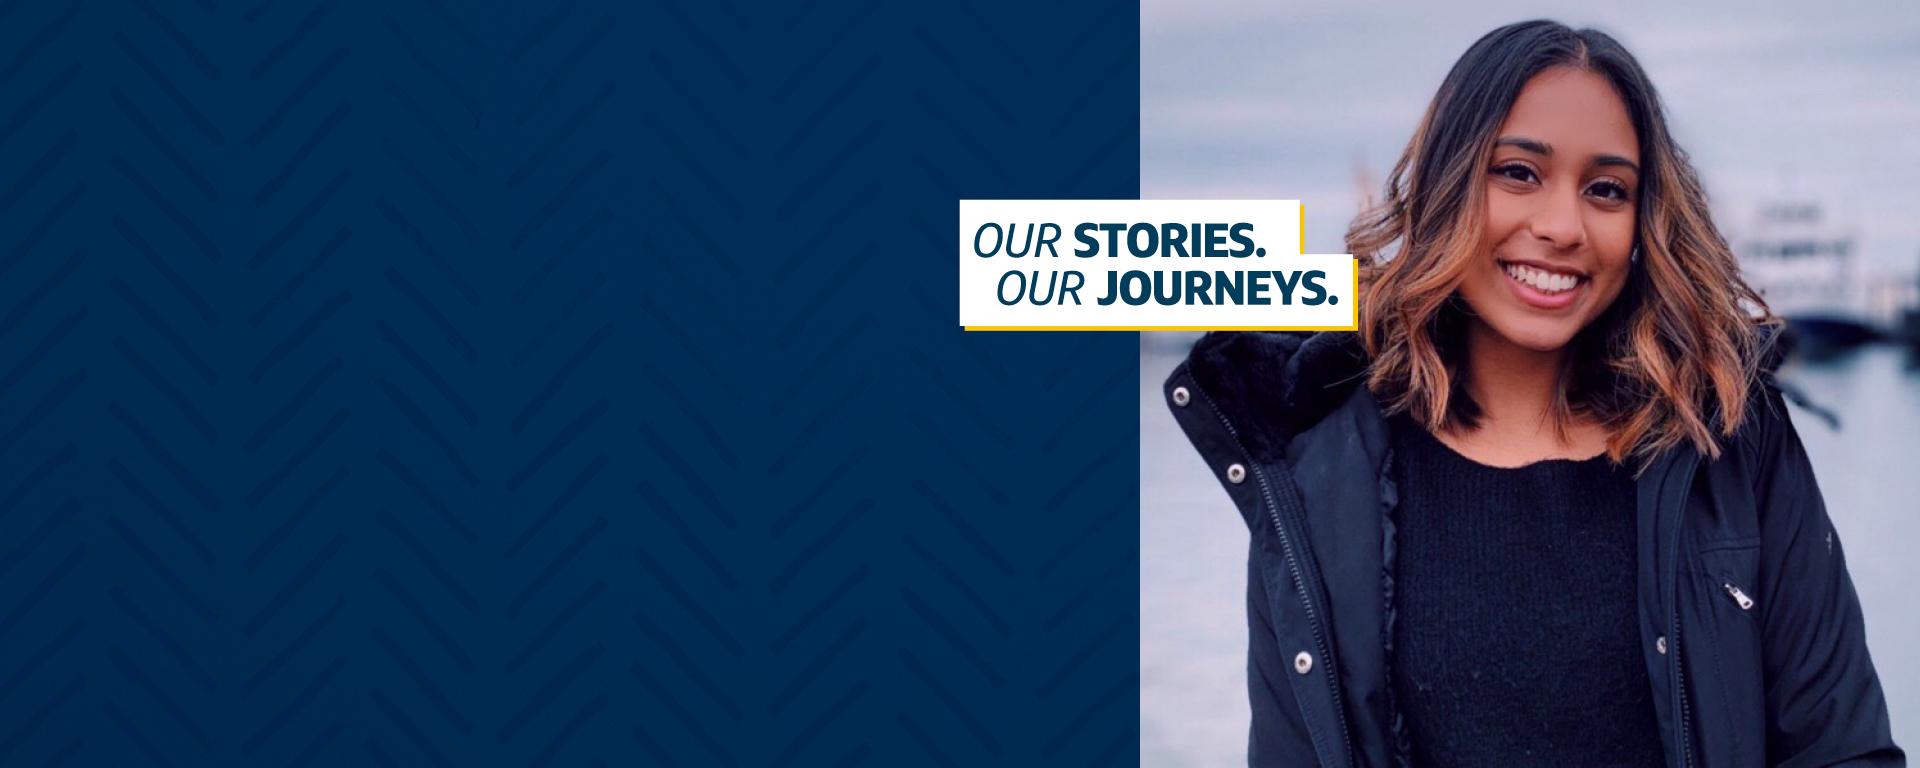 Picture of Capital One associate Mahi standing outside with a coat on on the left, with a dark blue background on the right, and a logo that says 'Our Stories, Our Journeys'